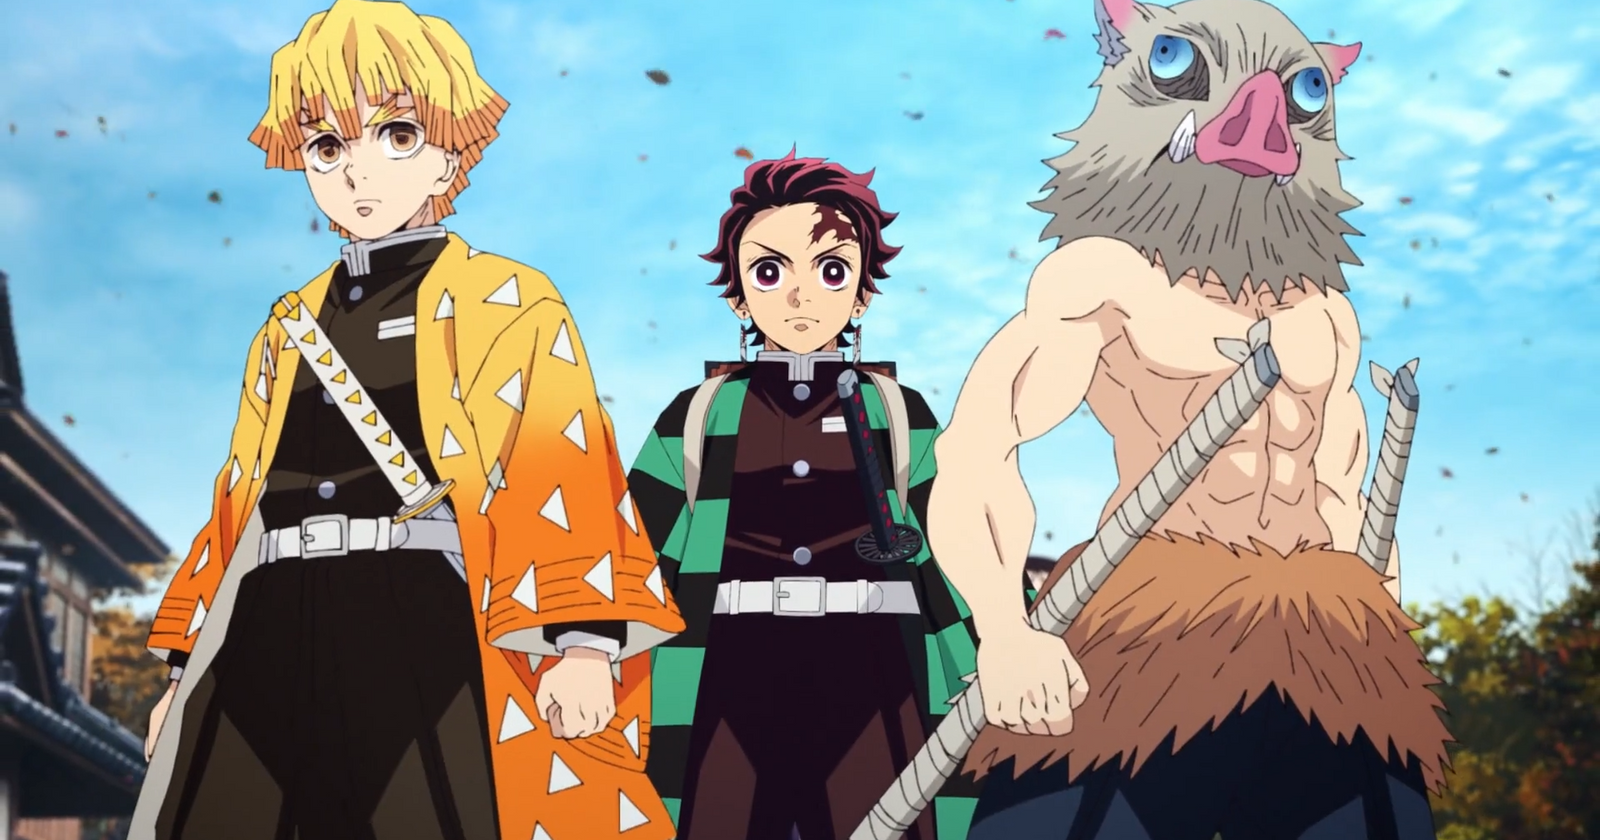 Final Episode of Demon Slayer Season 2 Will Be 45 Minutes Long